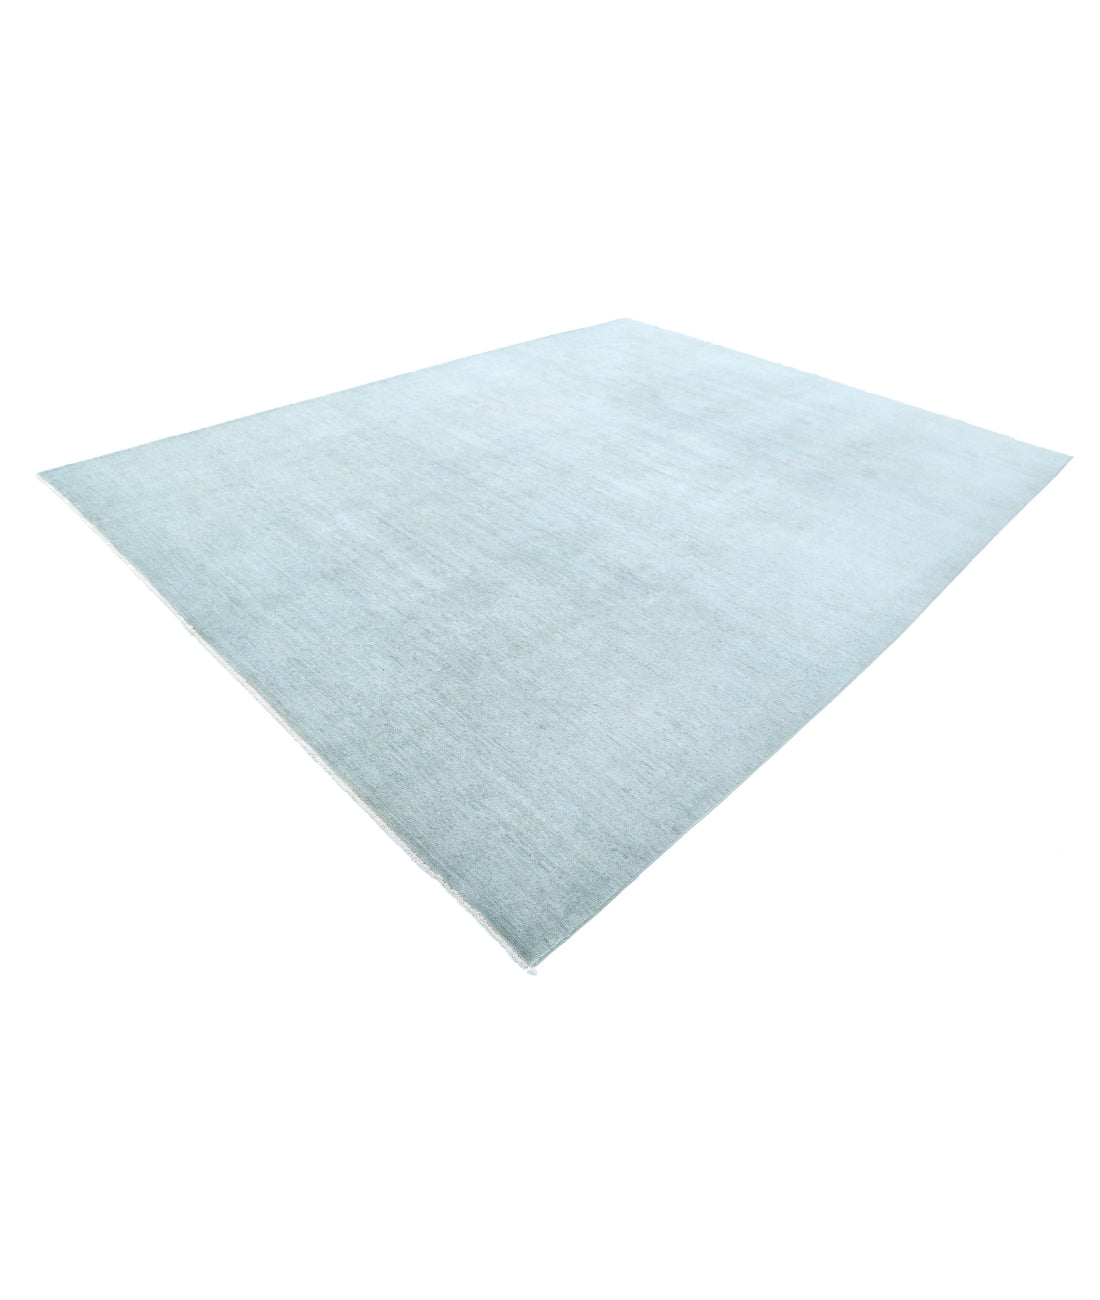 Hand Knotted Overdye Wool Rug - 9'1'' x 11'10'' 9'1'' x 11'10'' (273 X 355) / Grey / N/A